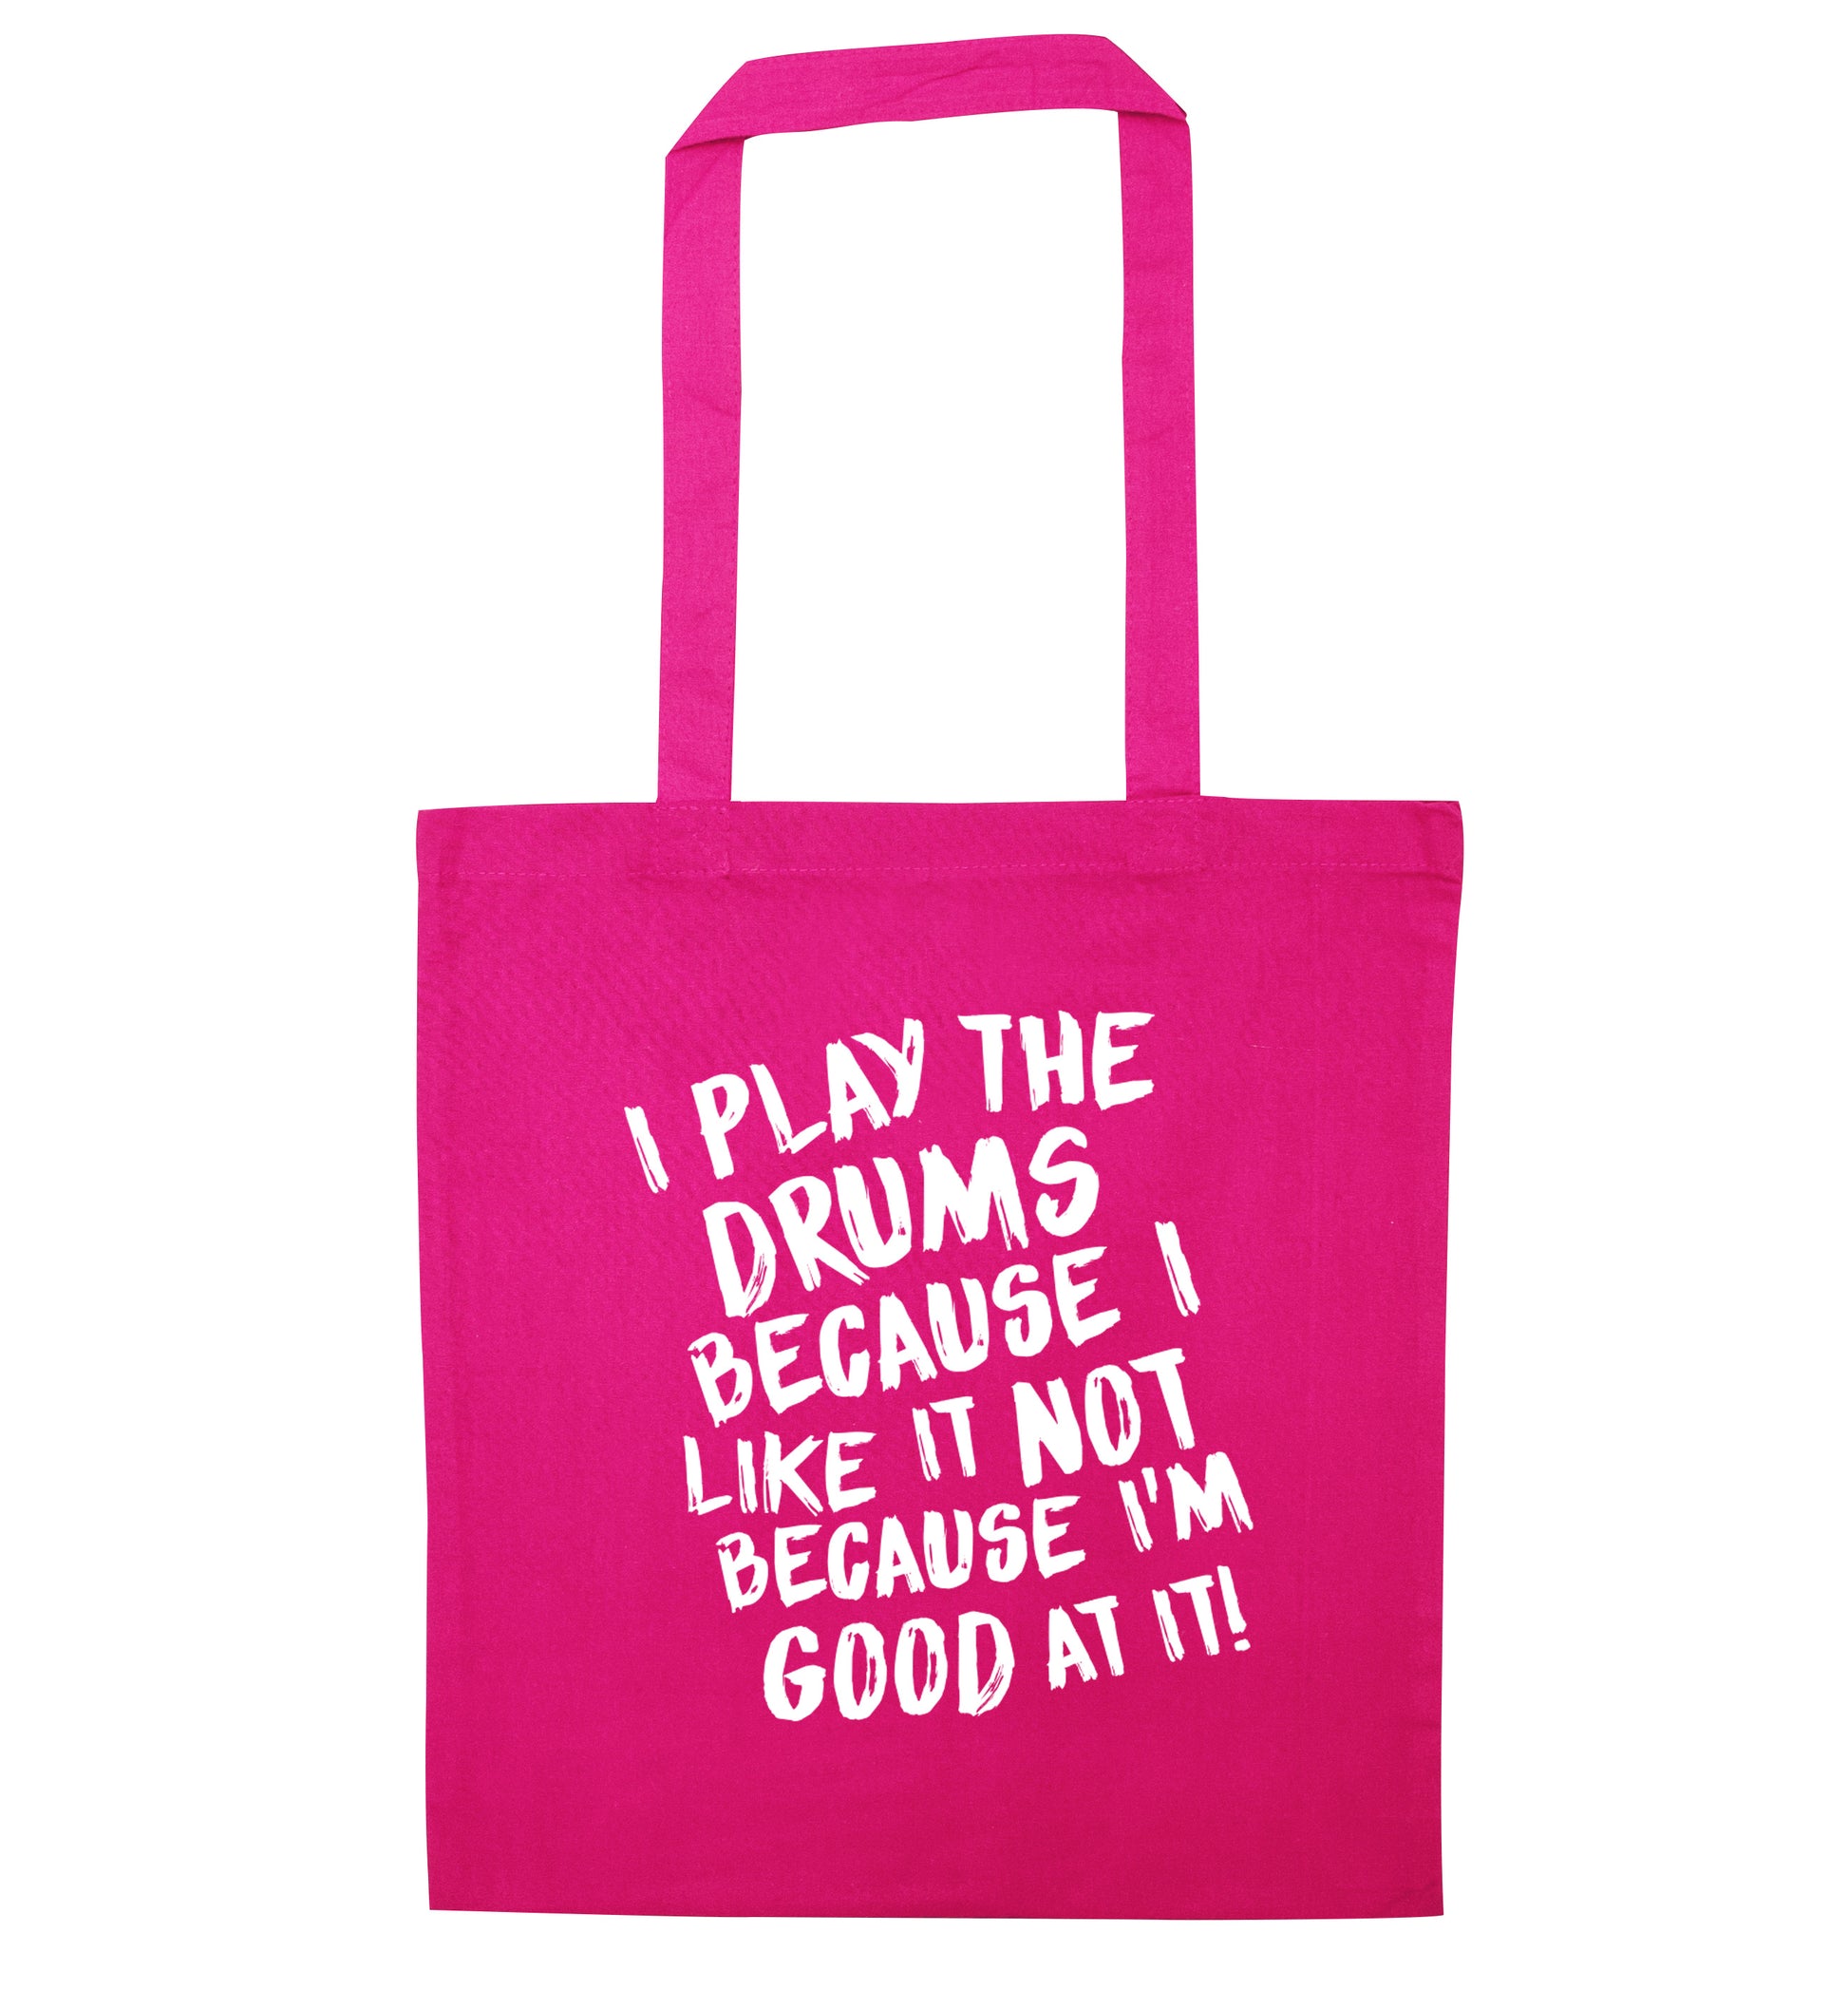 I play the drums because I like it not because I'm good at it pink tote bag